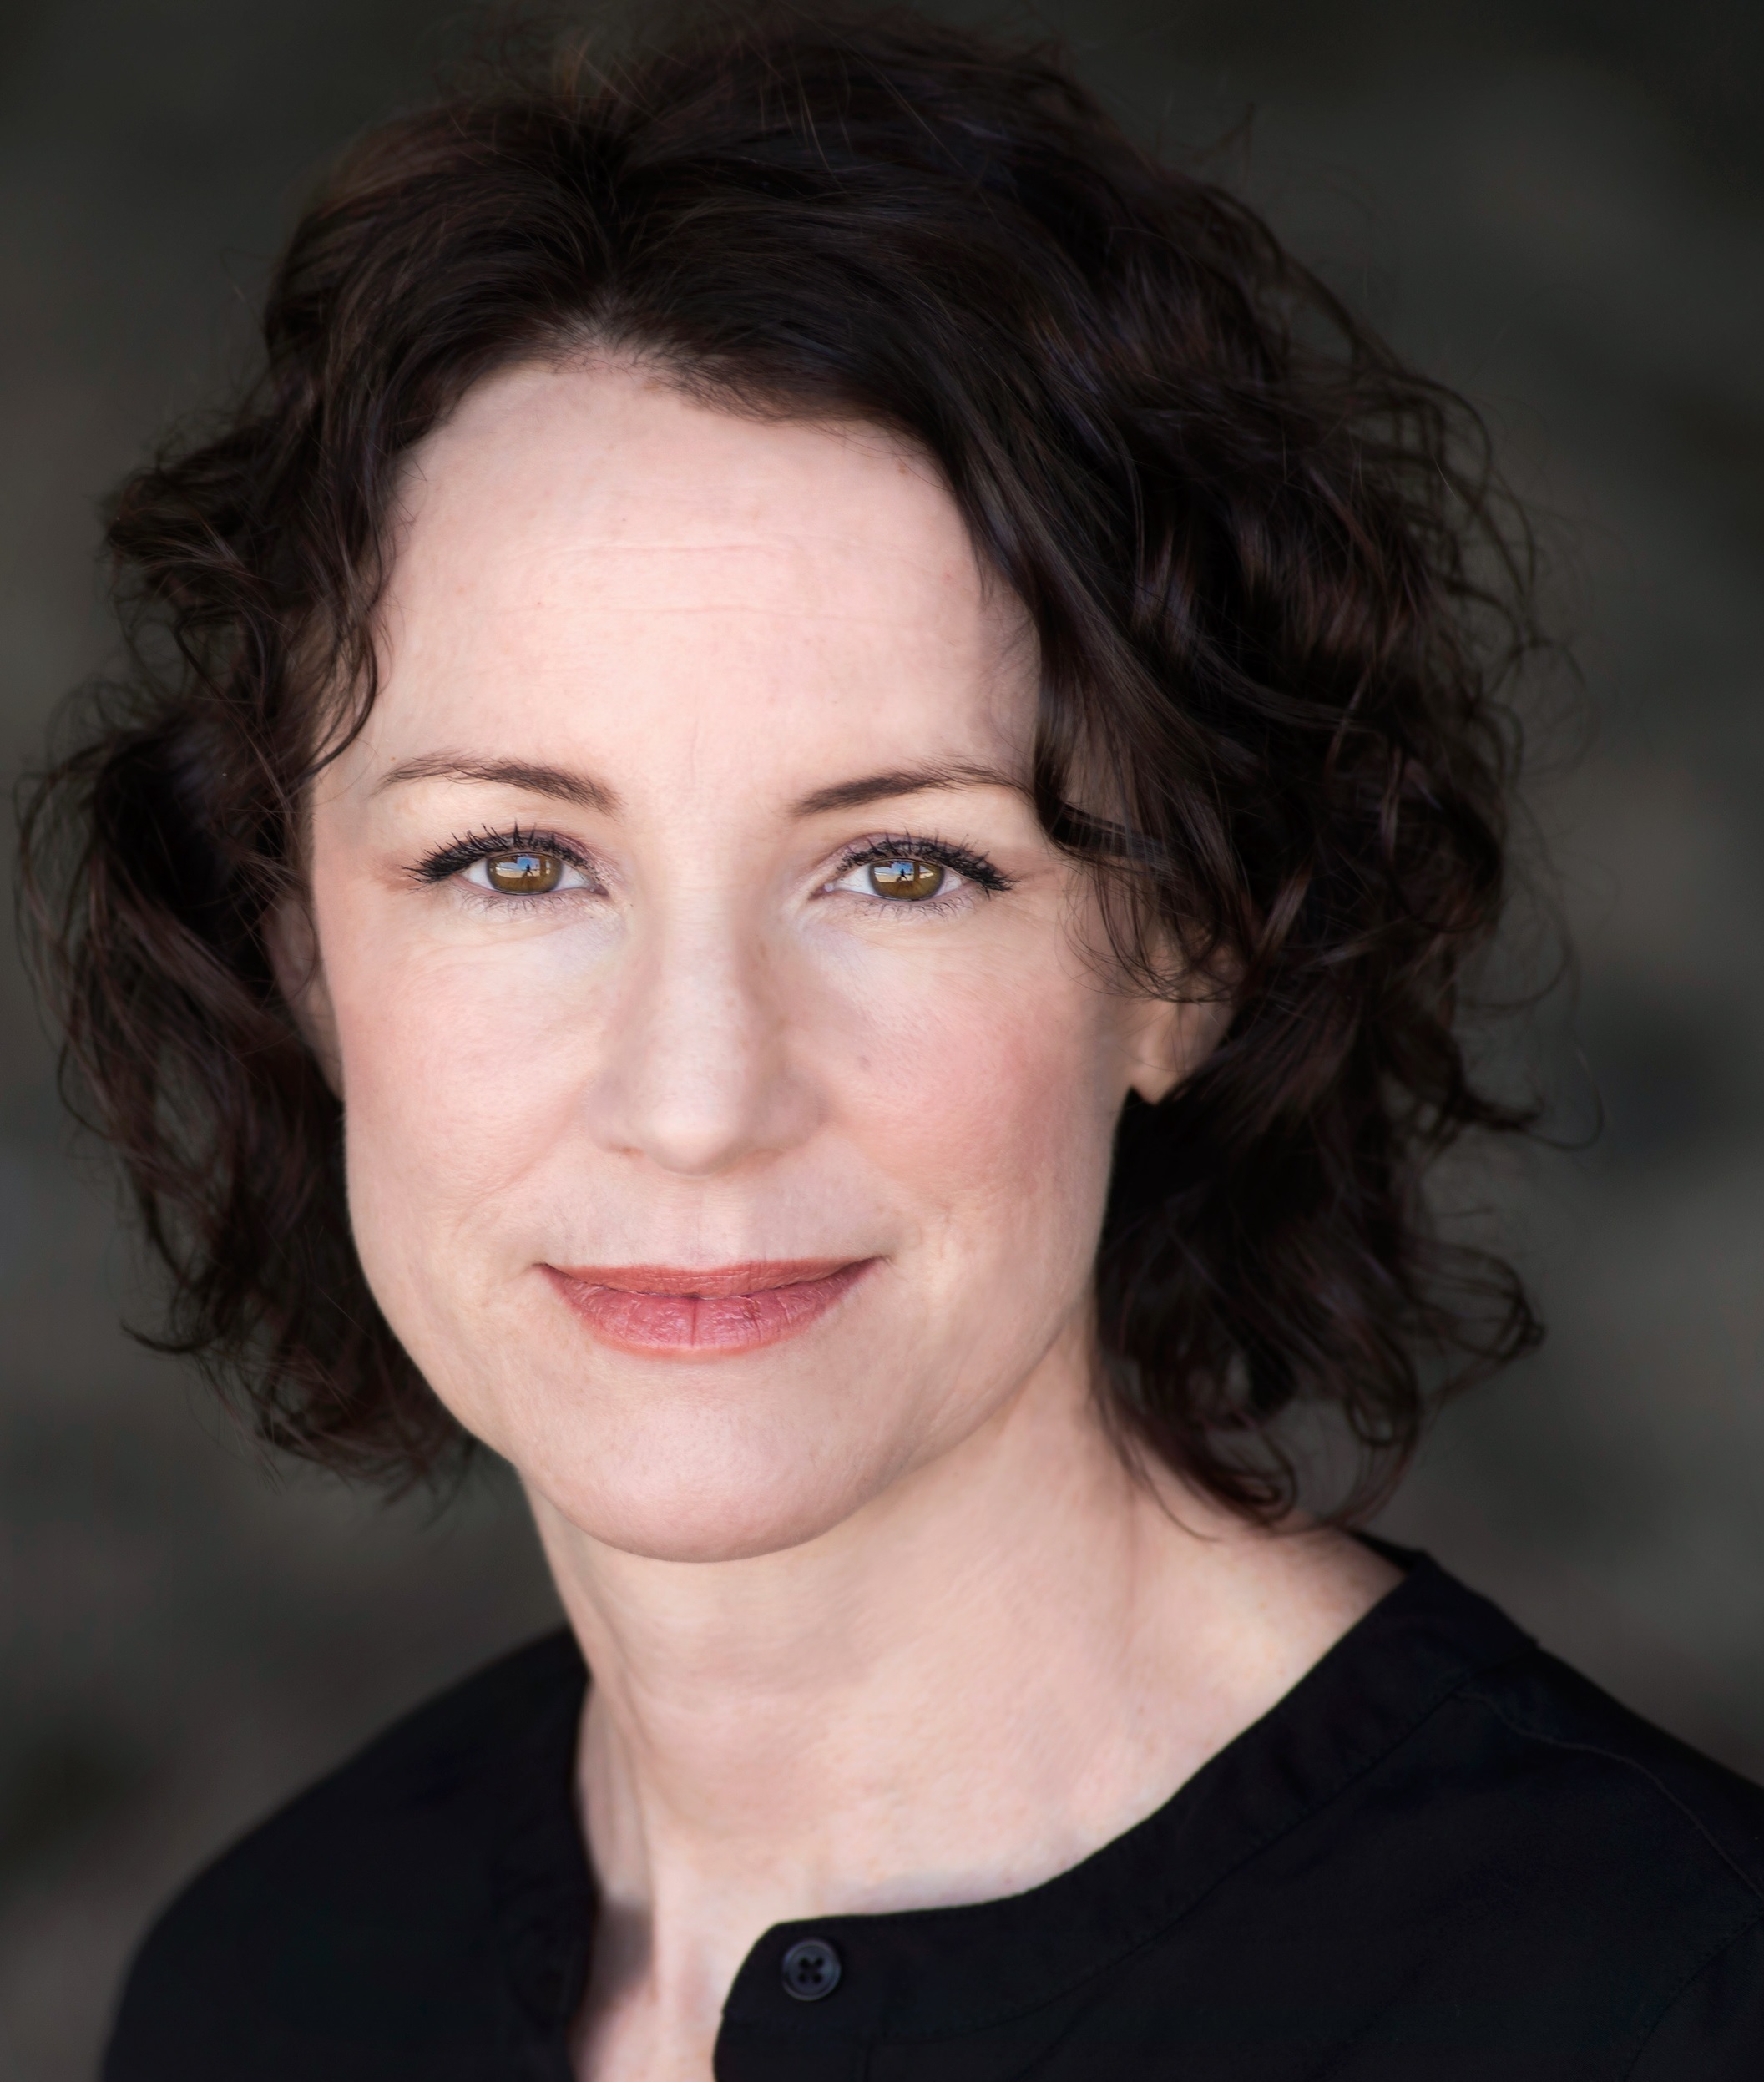 Kathryn Carner, company member of Tim Robbins' The Actors' Gang stars as Miss Anne Elliot in Placer Rep's new work, Persuasion, based on the Jane Austen novel.